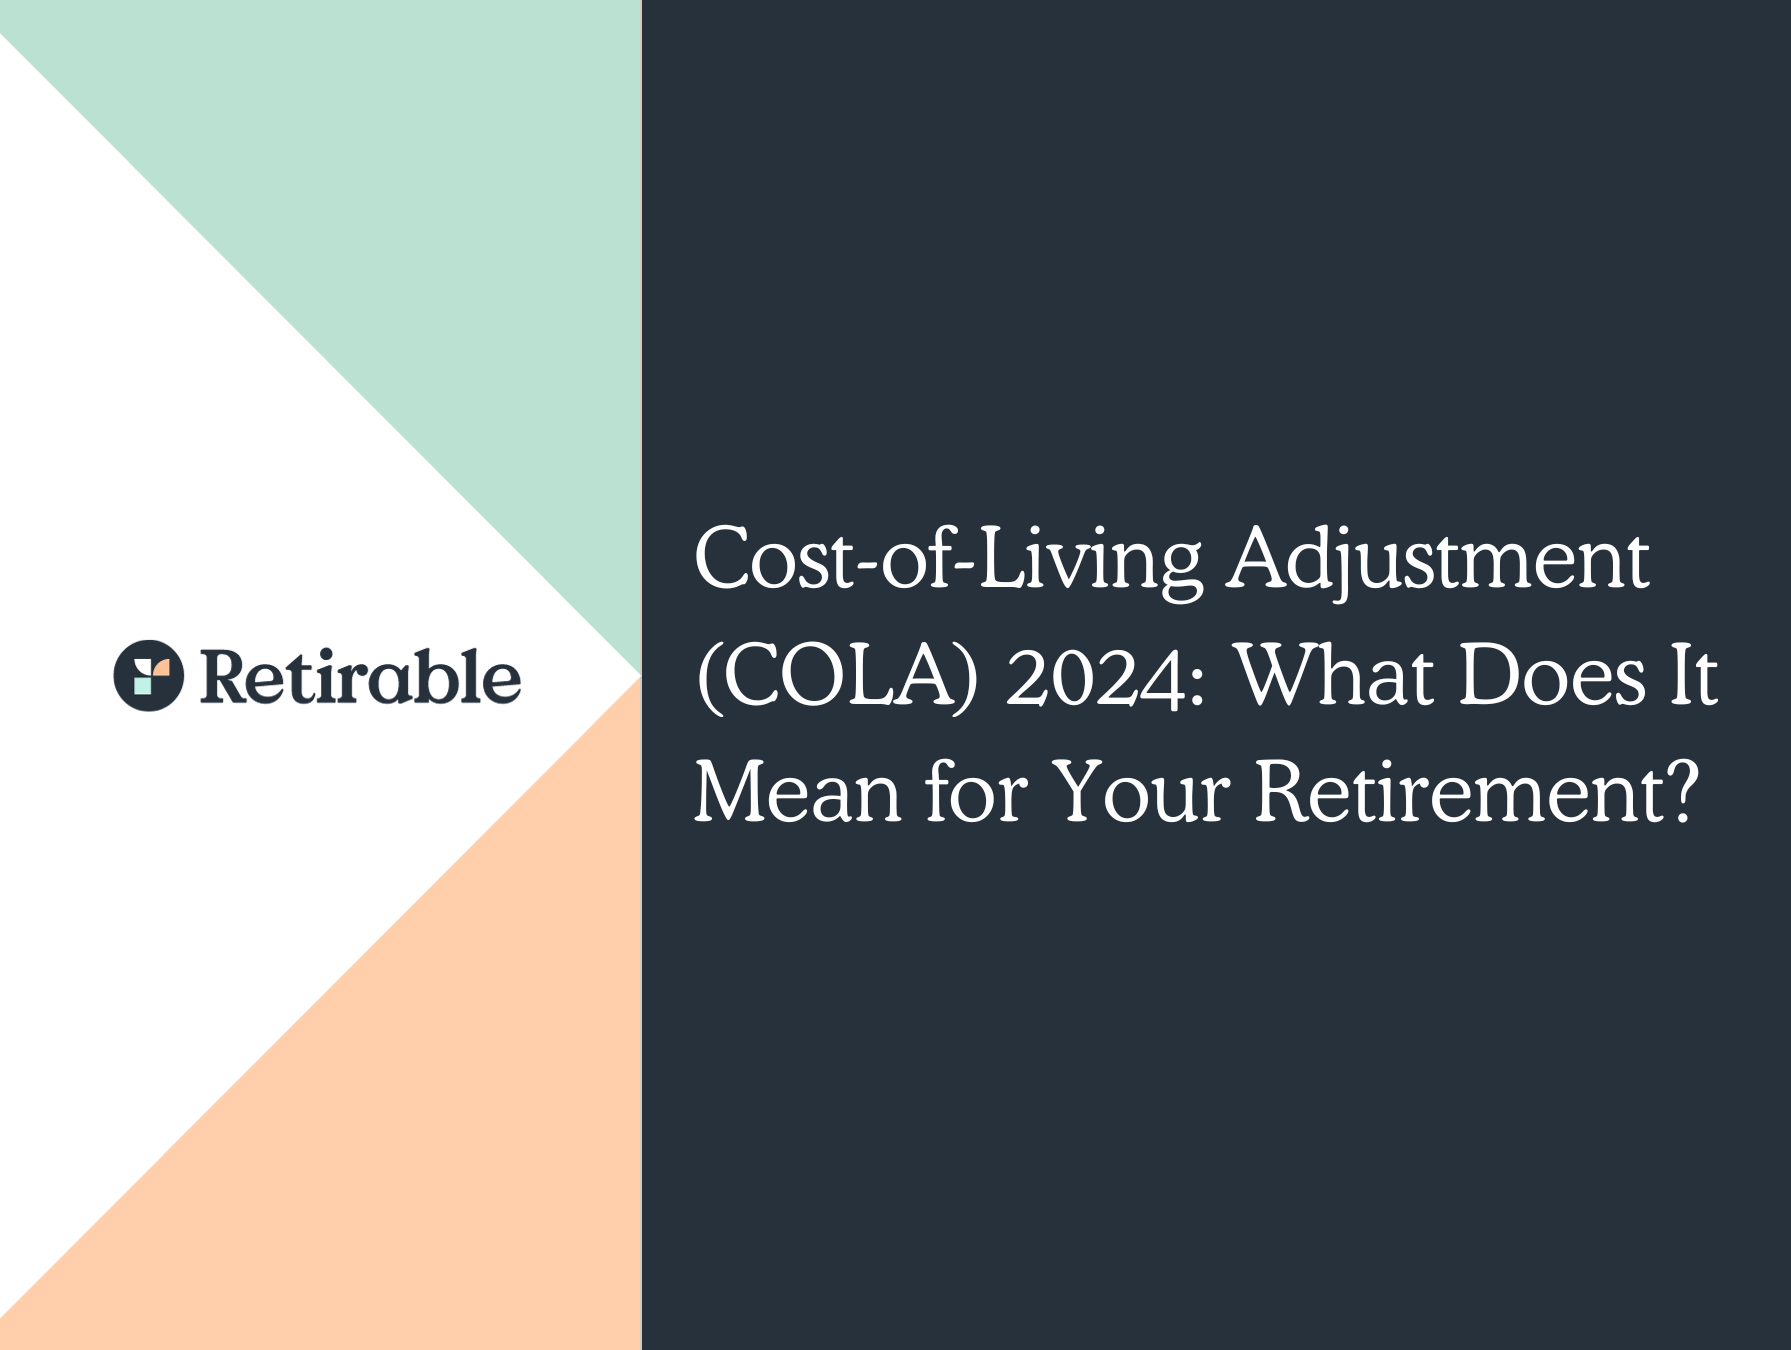 CostofLiving Adjustment (COLA) 2024 What Does It Mean For Your Retirement?